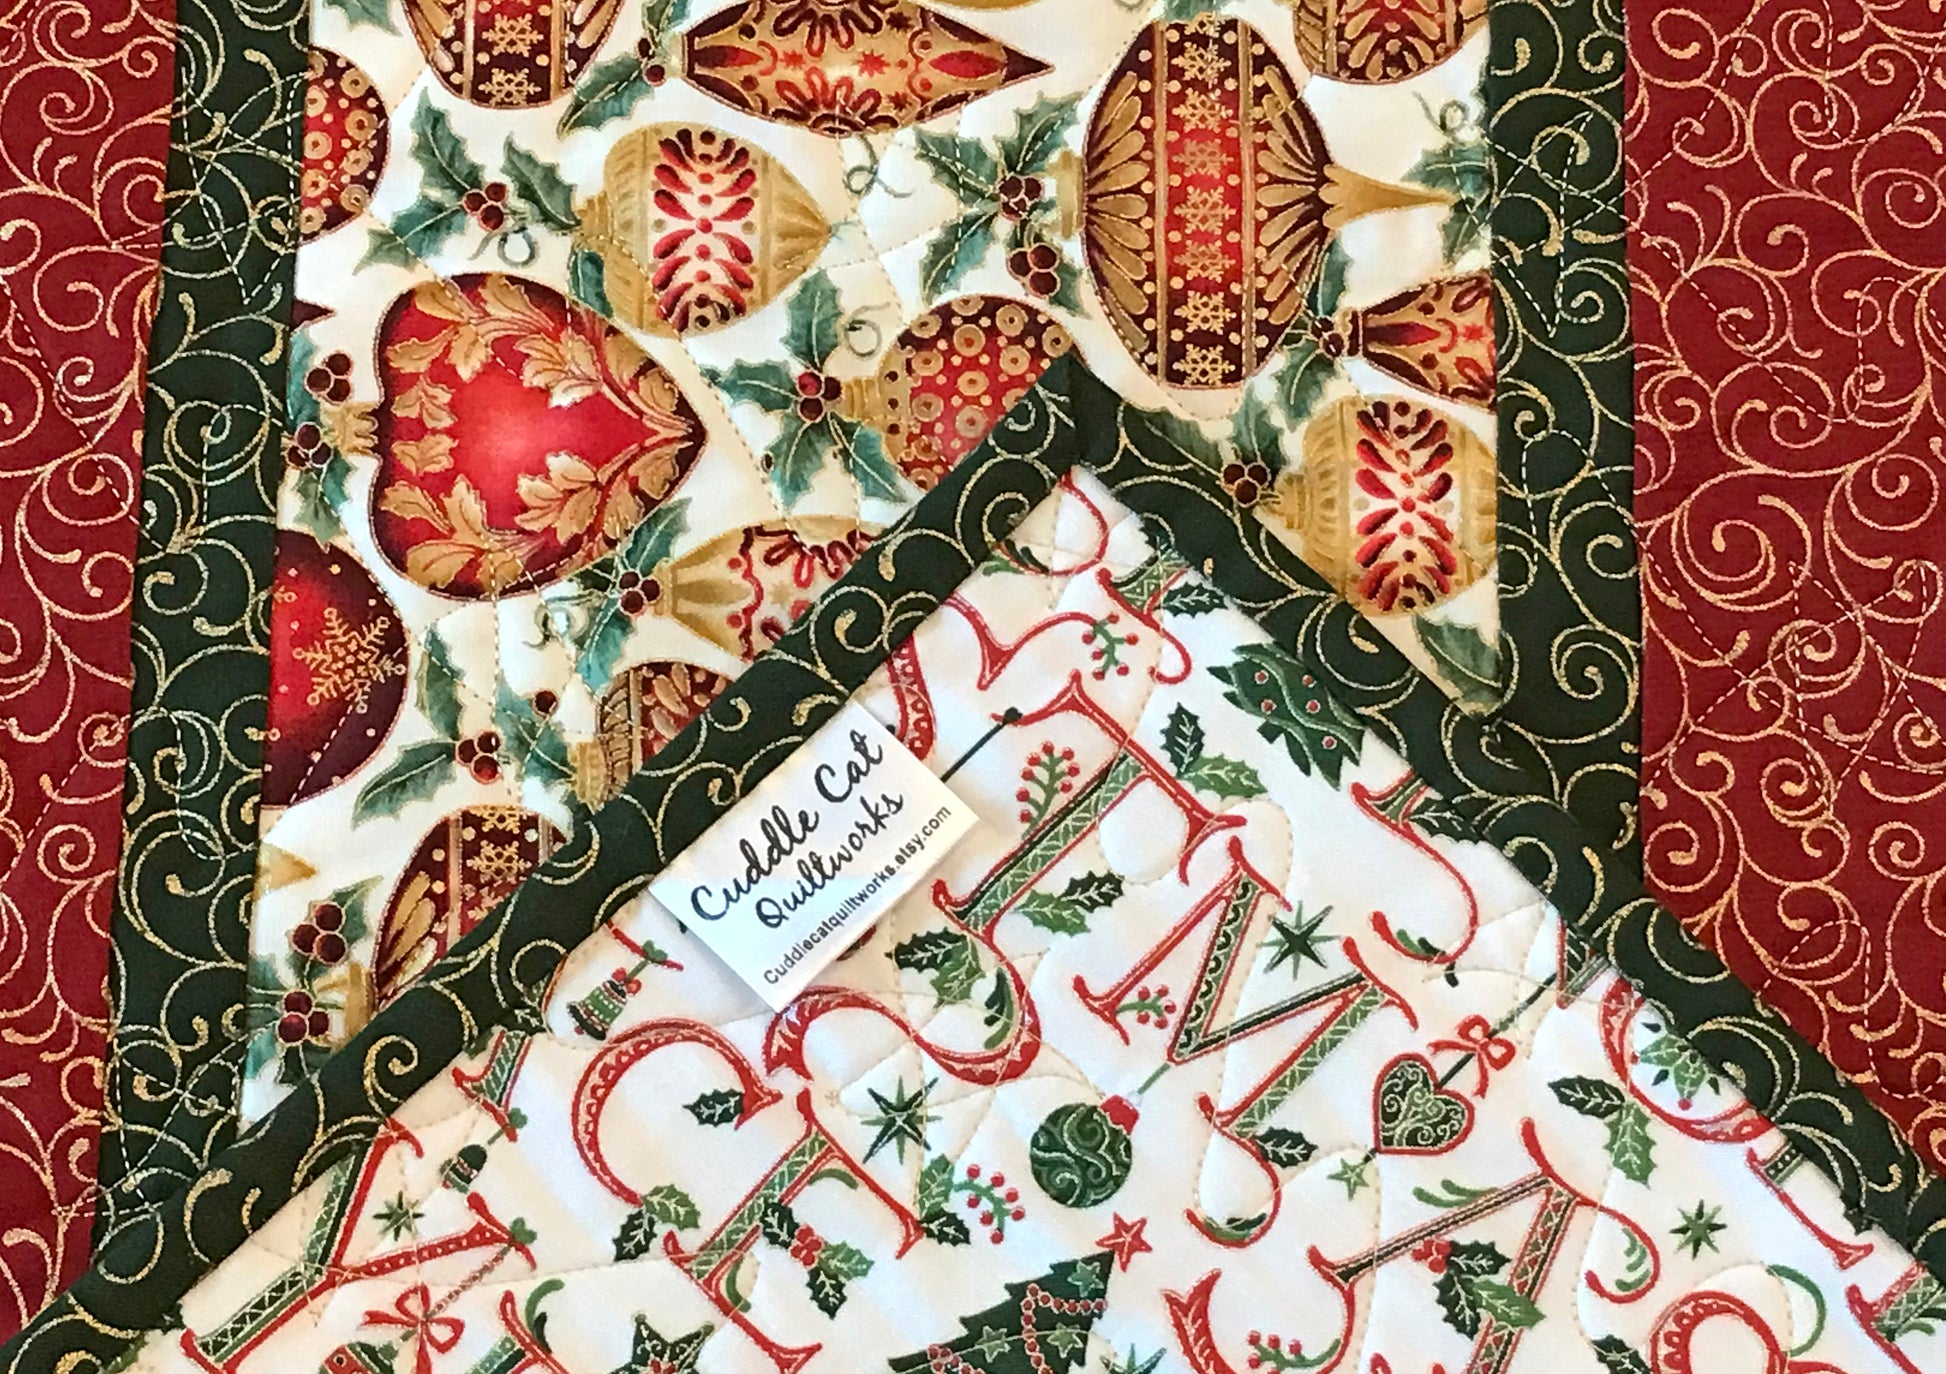 Christmas Ornament Table Runner - Handmade Quilts, Digital Patterns, and Home Décor items online - Cuddle Cat Quiltworks